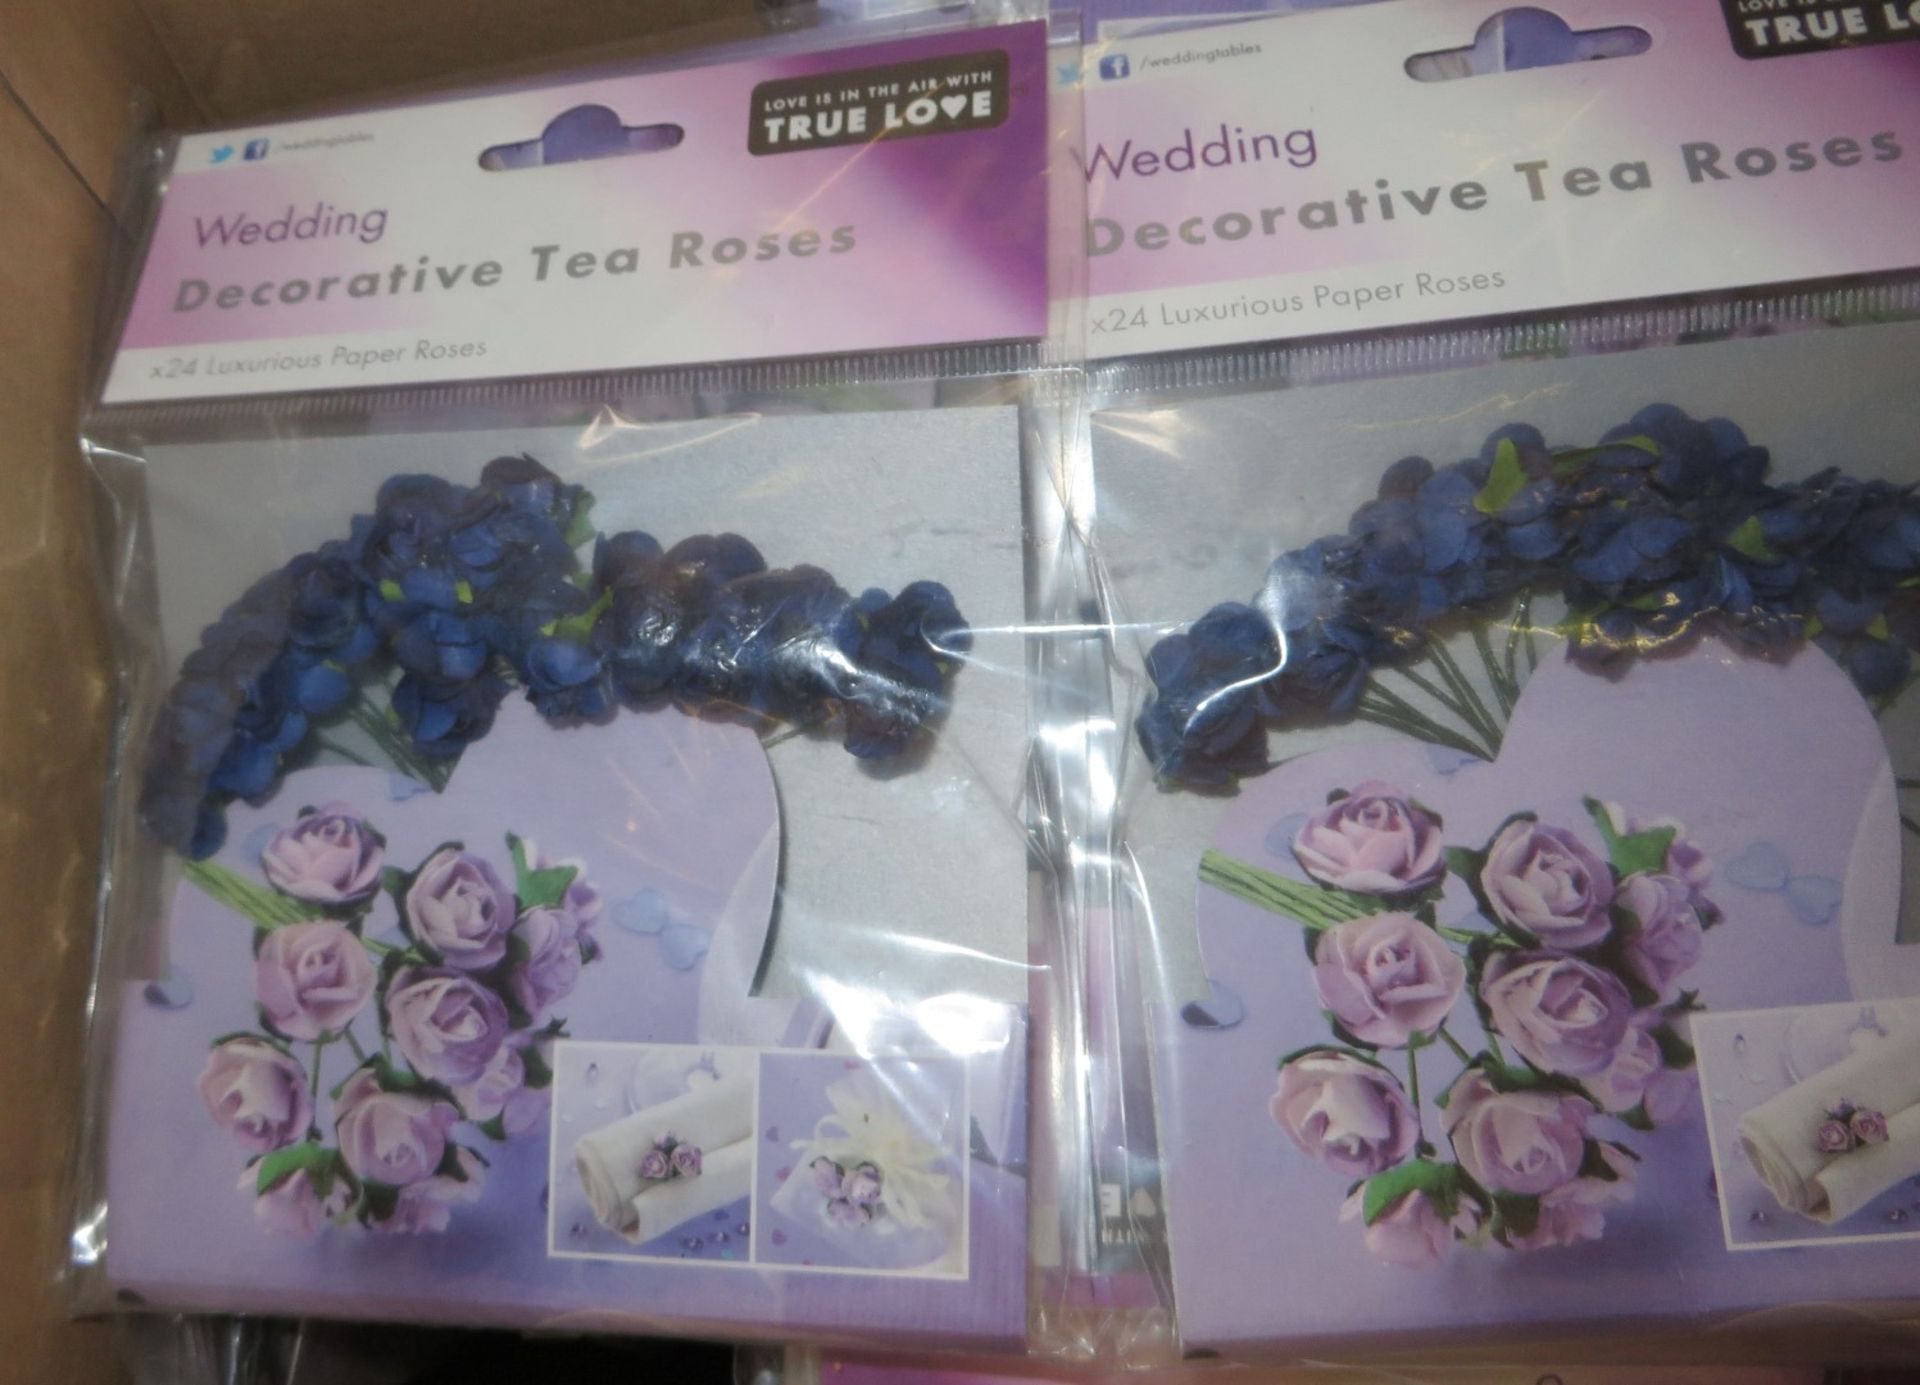 6 x Boxes of Decorative Wedding Luxurious Paper Tea Roses - New/Boxed - CL185 - Ref: DSY0260 - Locat - Image 8 of 10